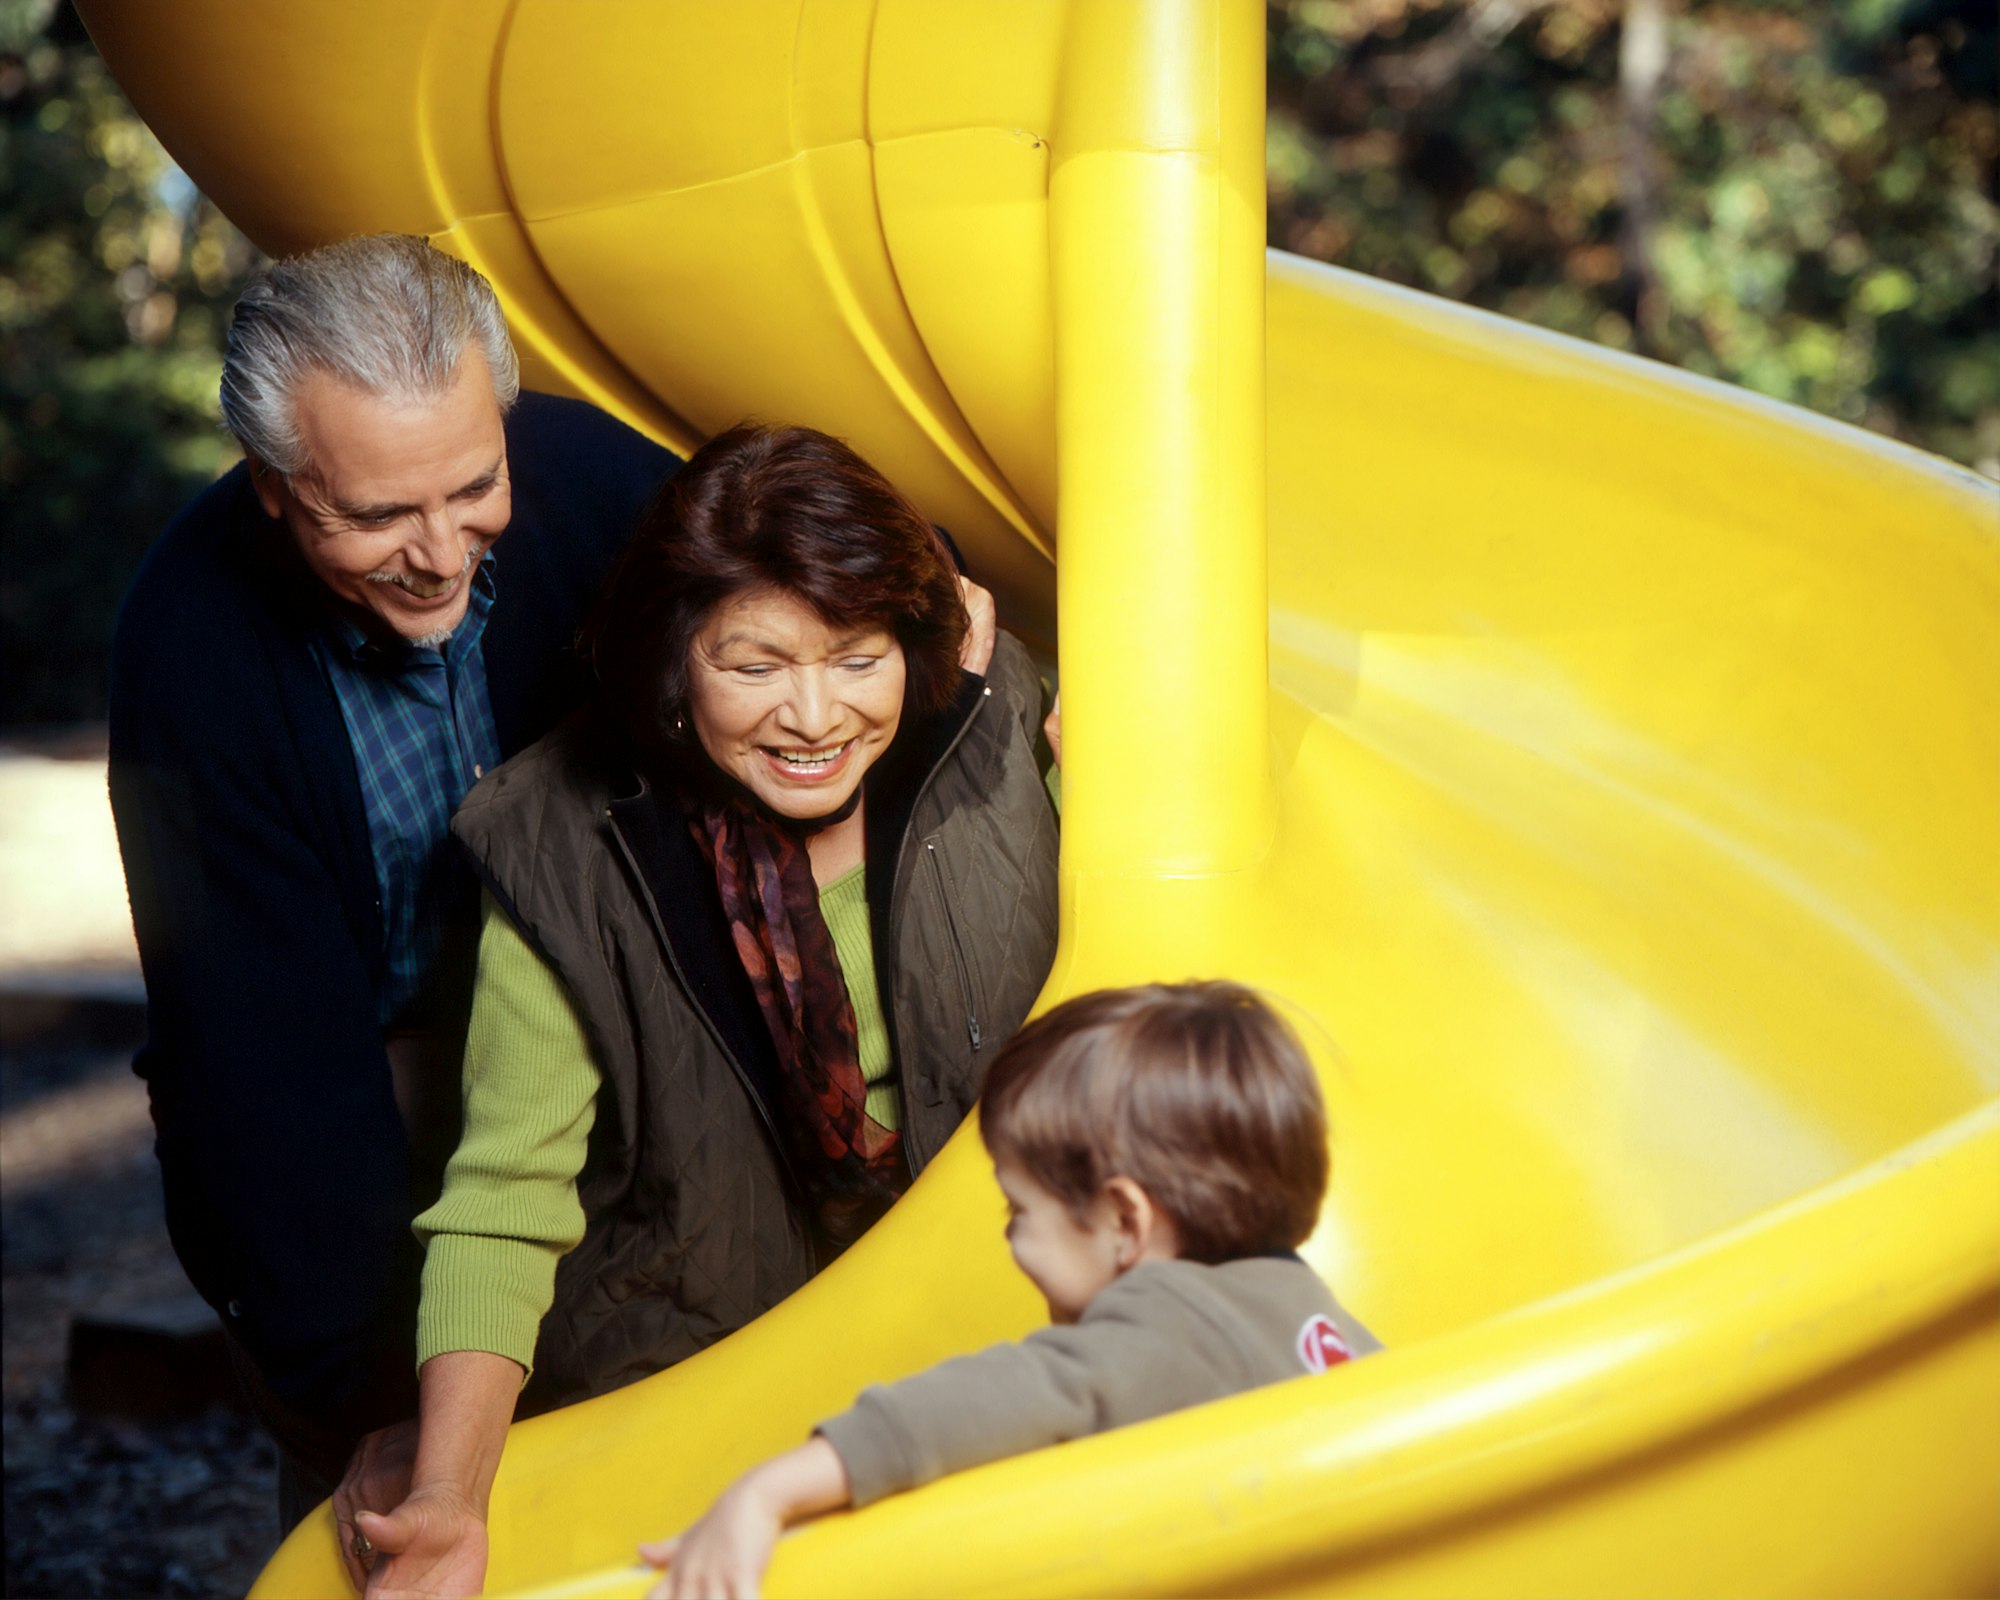 Family at a Playground. An older male and female standing at the bottom of a yellow slide while a young male child slides down. Photographer Rhoda Baer